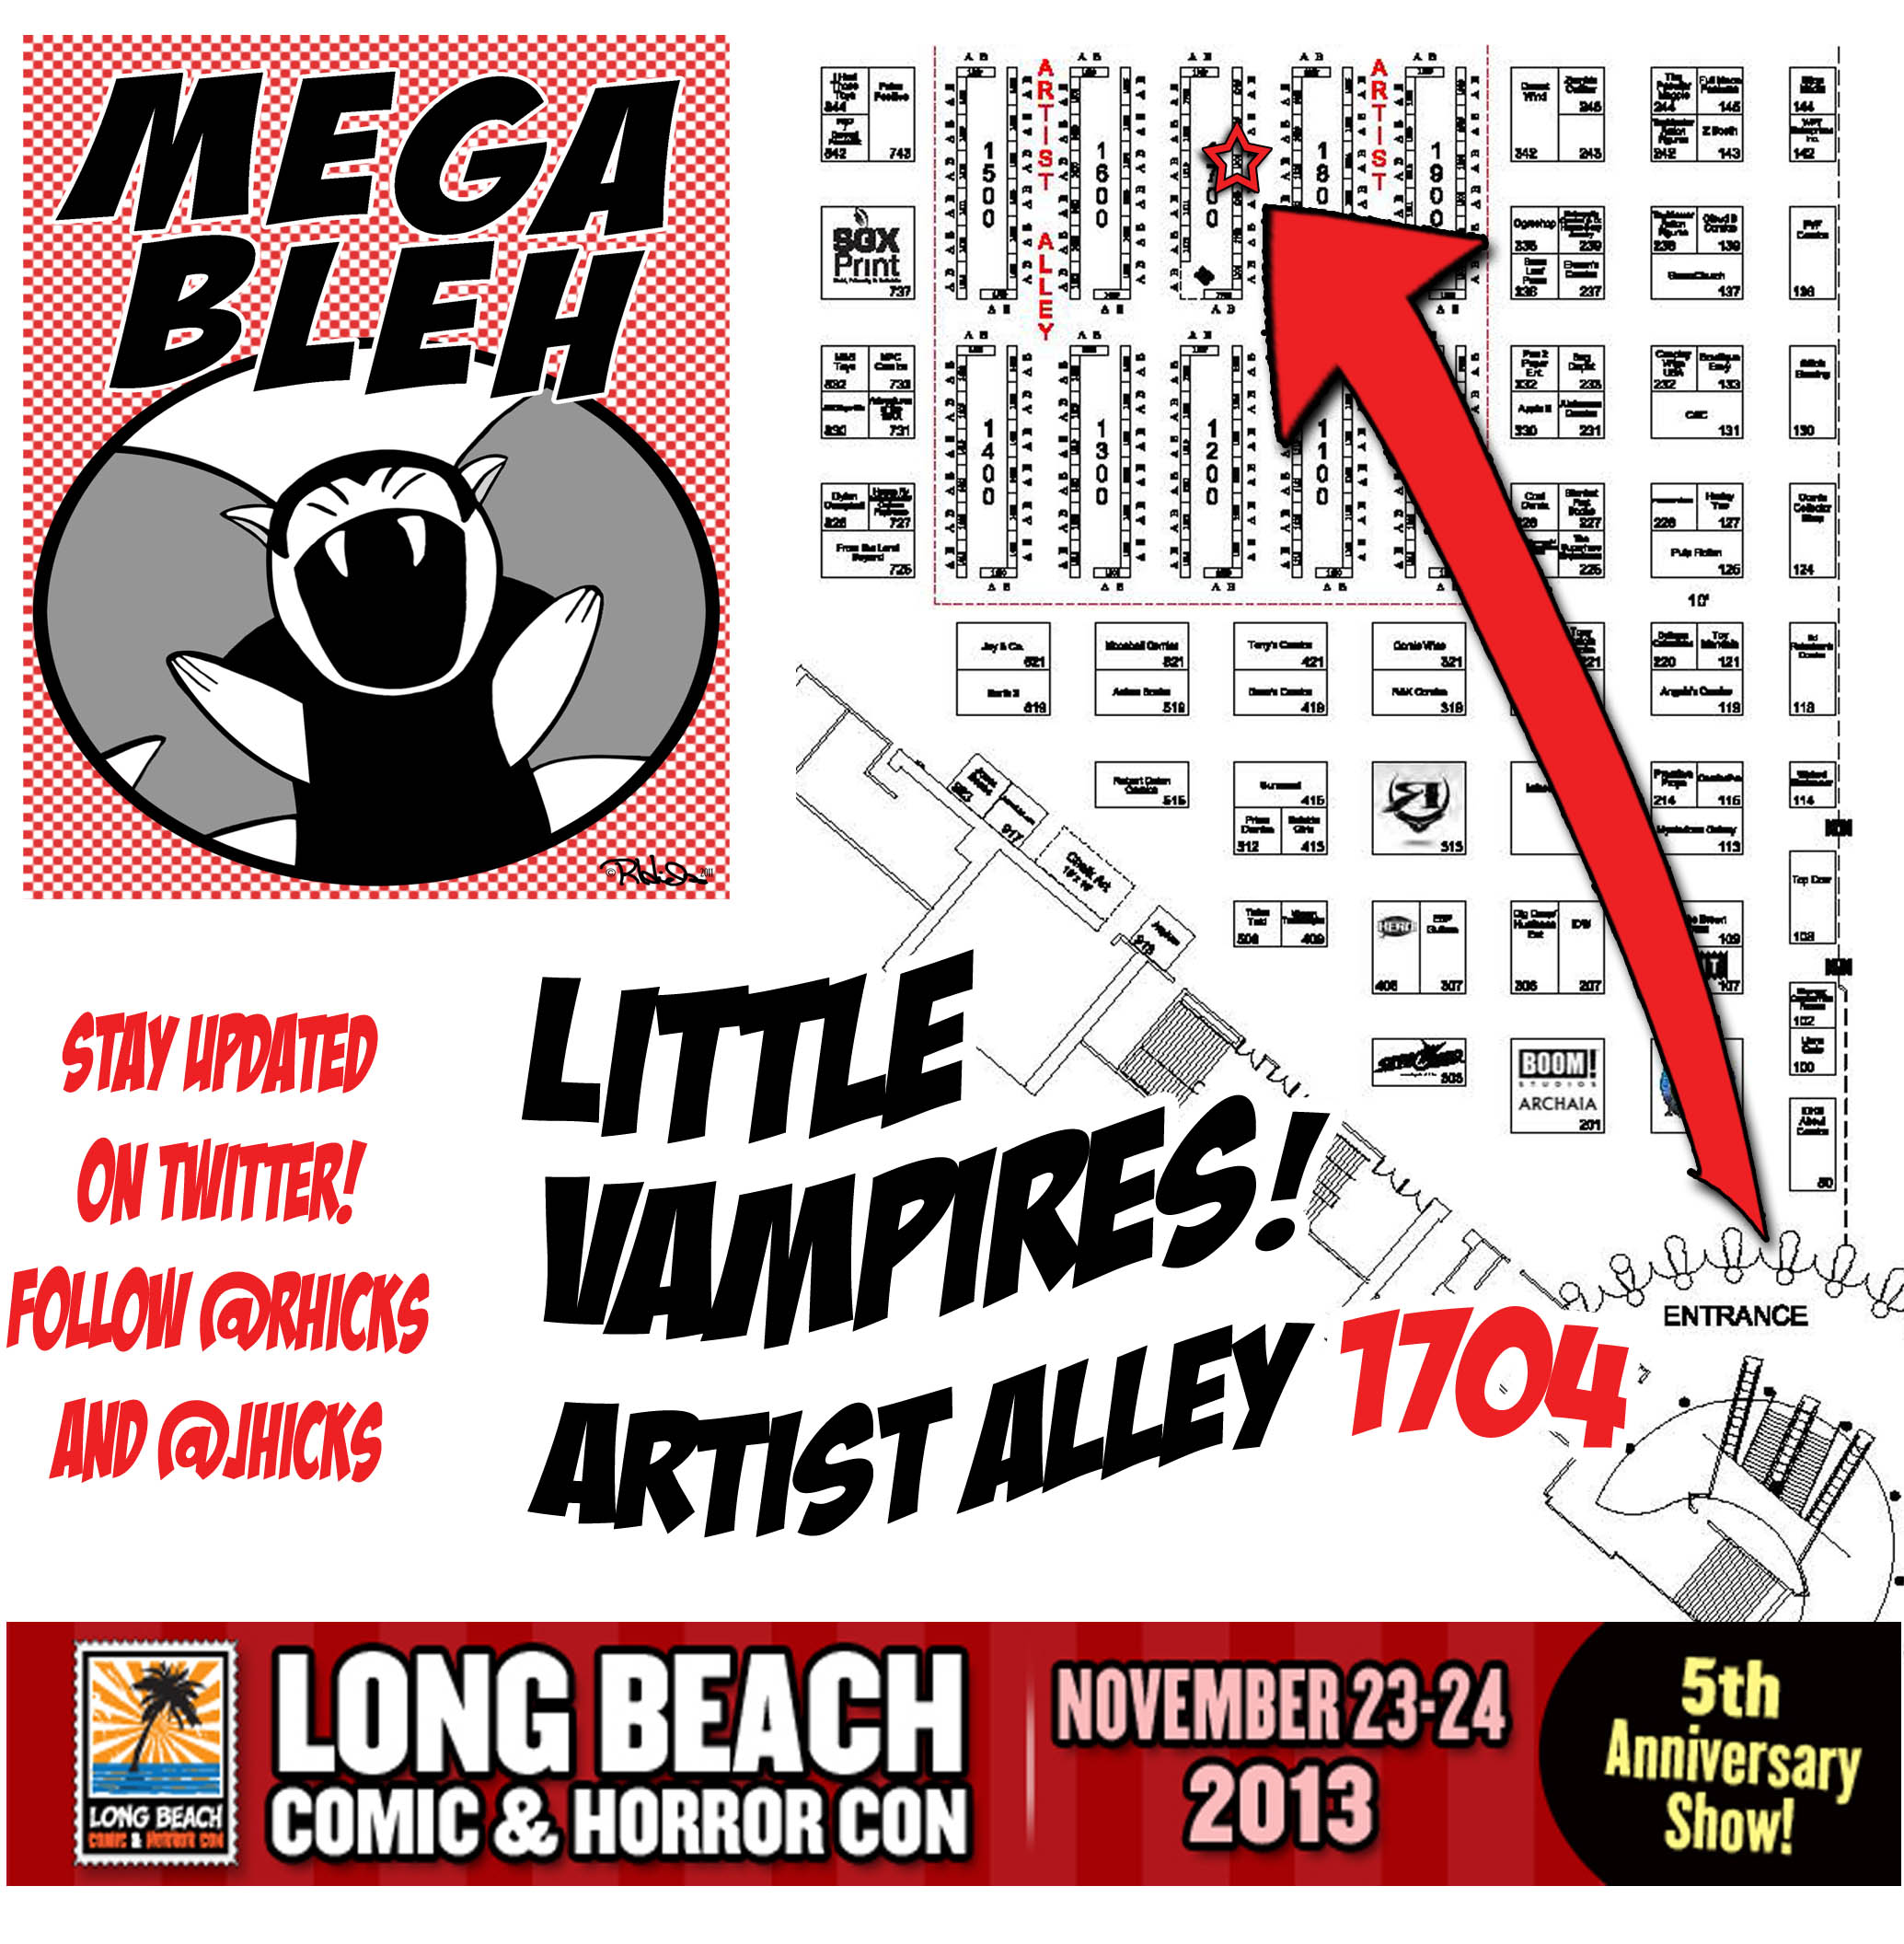 Long Beach Comic and Horror Con 2013 exhibitor floor map with the Little Vampires booth highlighted